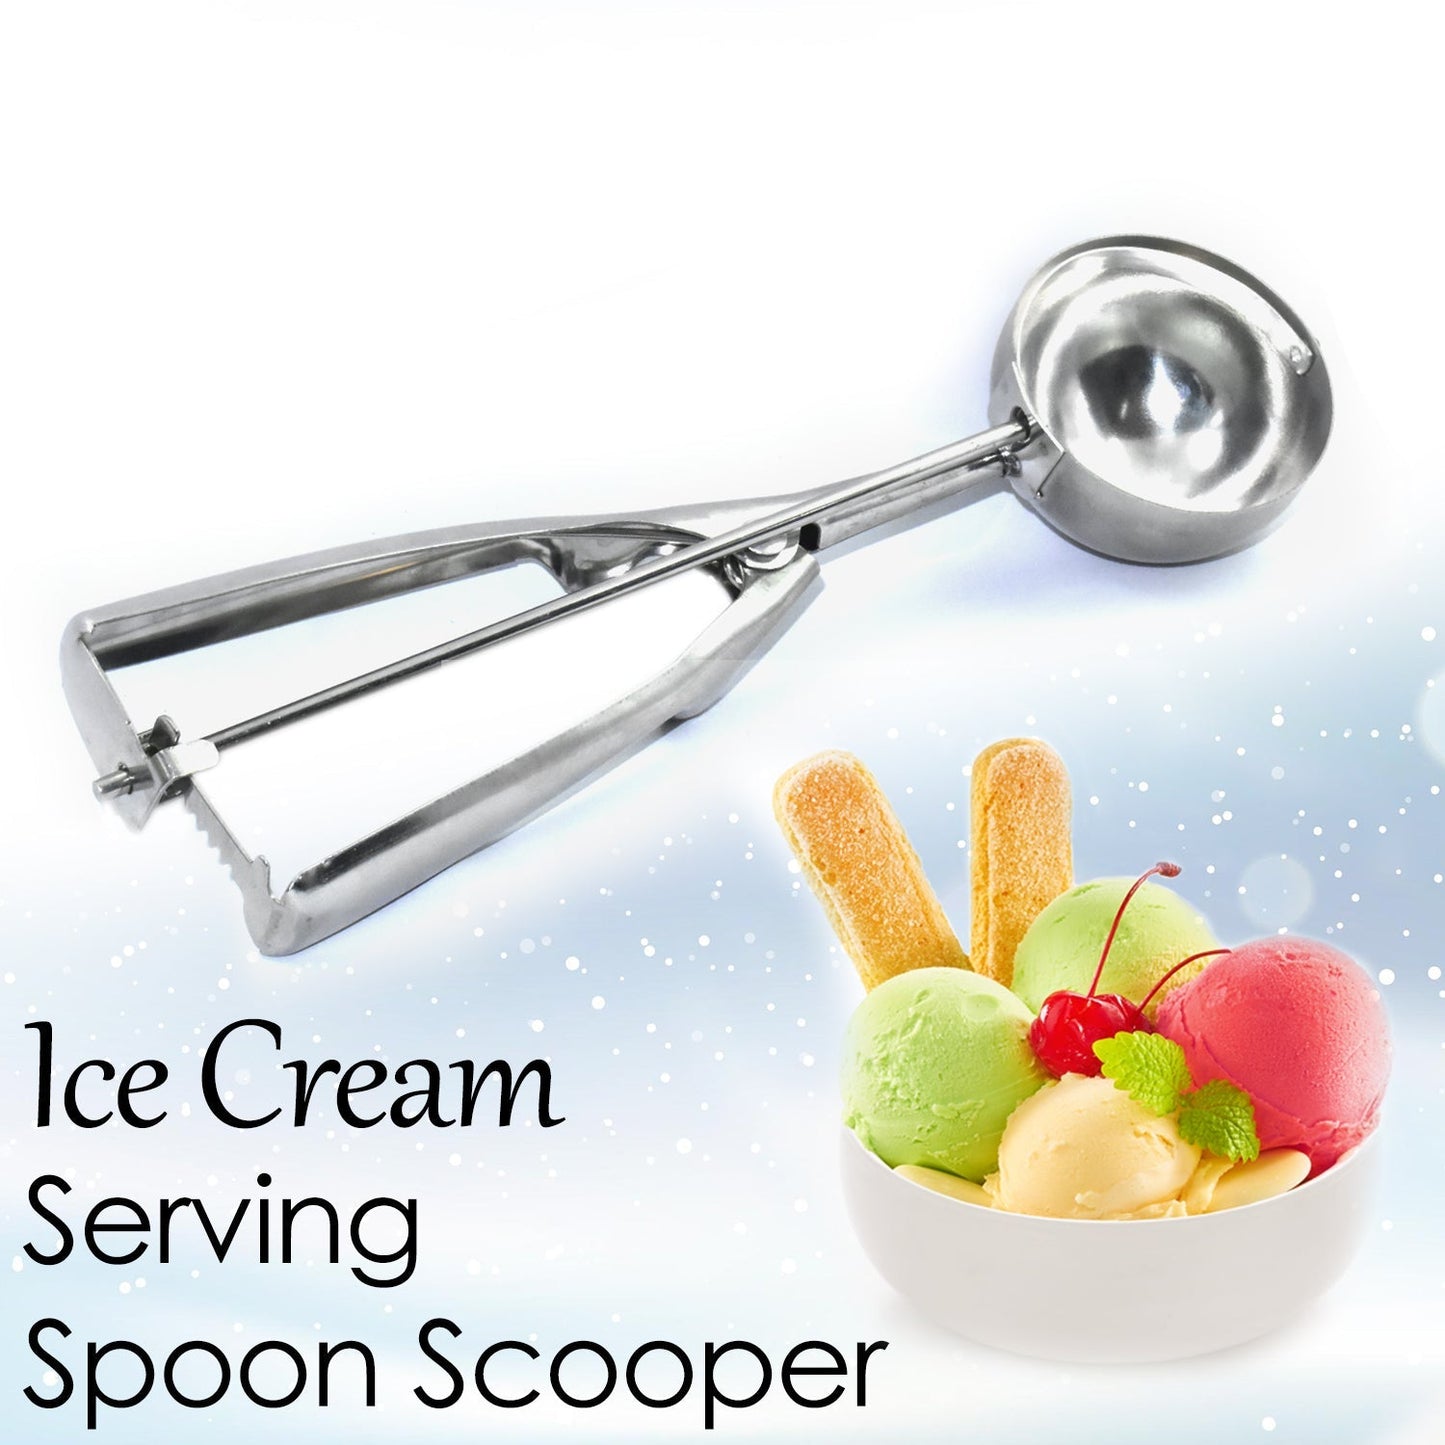 2523A Ice Cream Serving Scoop | Stainless Steel Premium Quality Ice Cream Serving Spoon Scooper with Trigger Release ( Small ) 